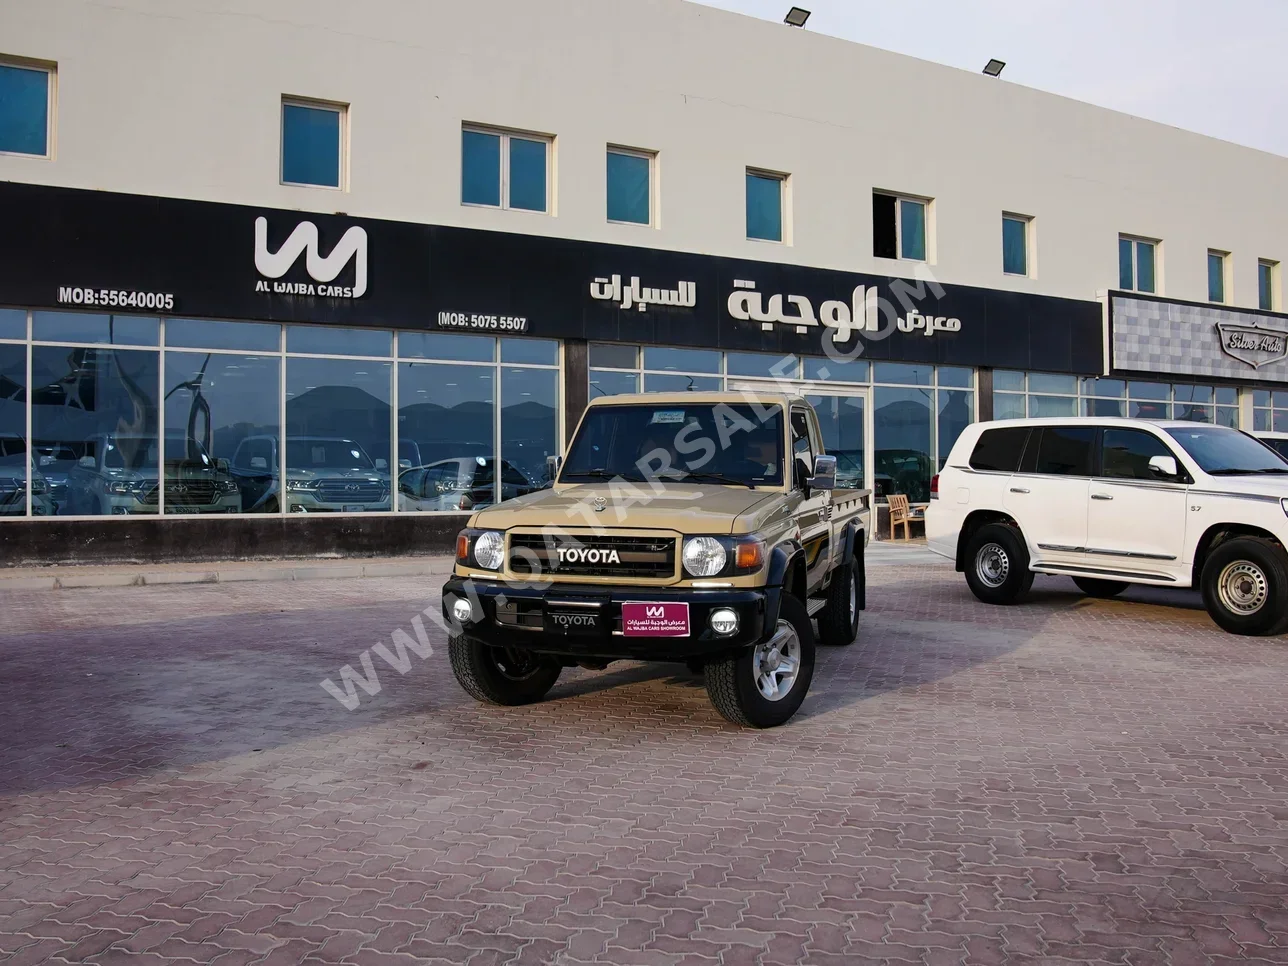 Toyota  Land Cruiser  LX  2022  Manual  8,000 Km  6 Cylinder  Four Wheel Drive (4WD)  Pick Up  Beige  With Warranty